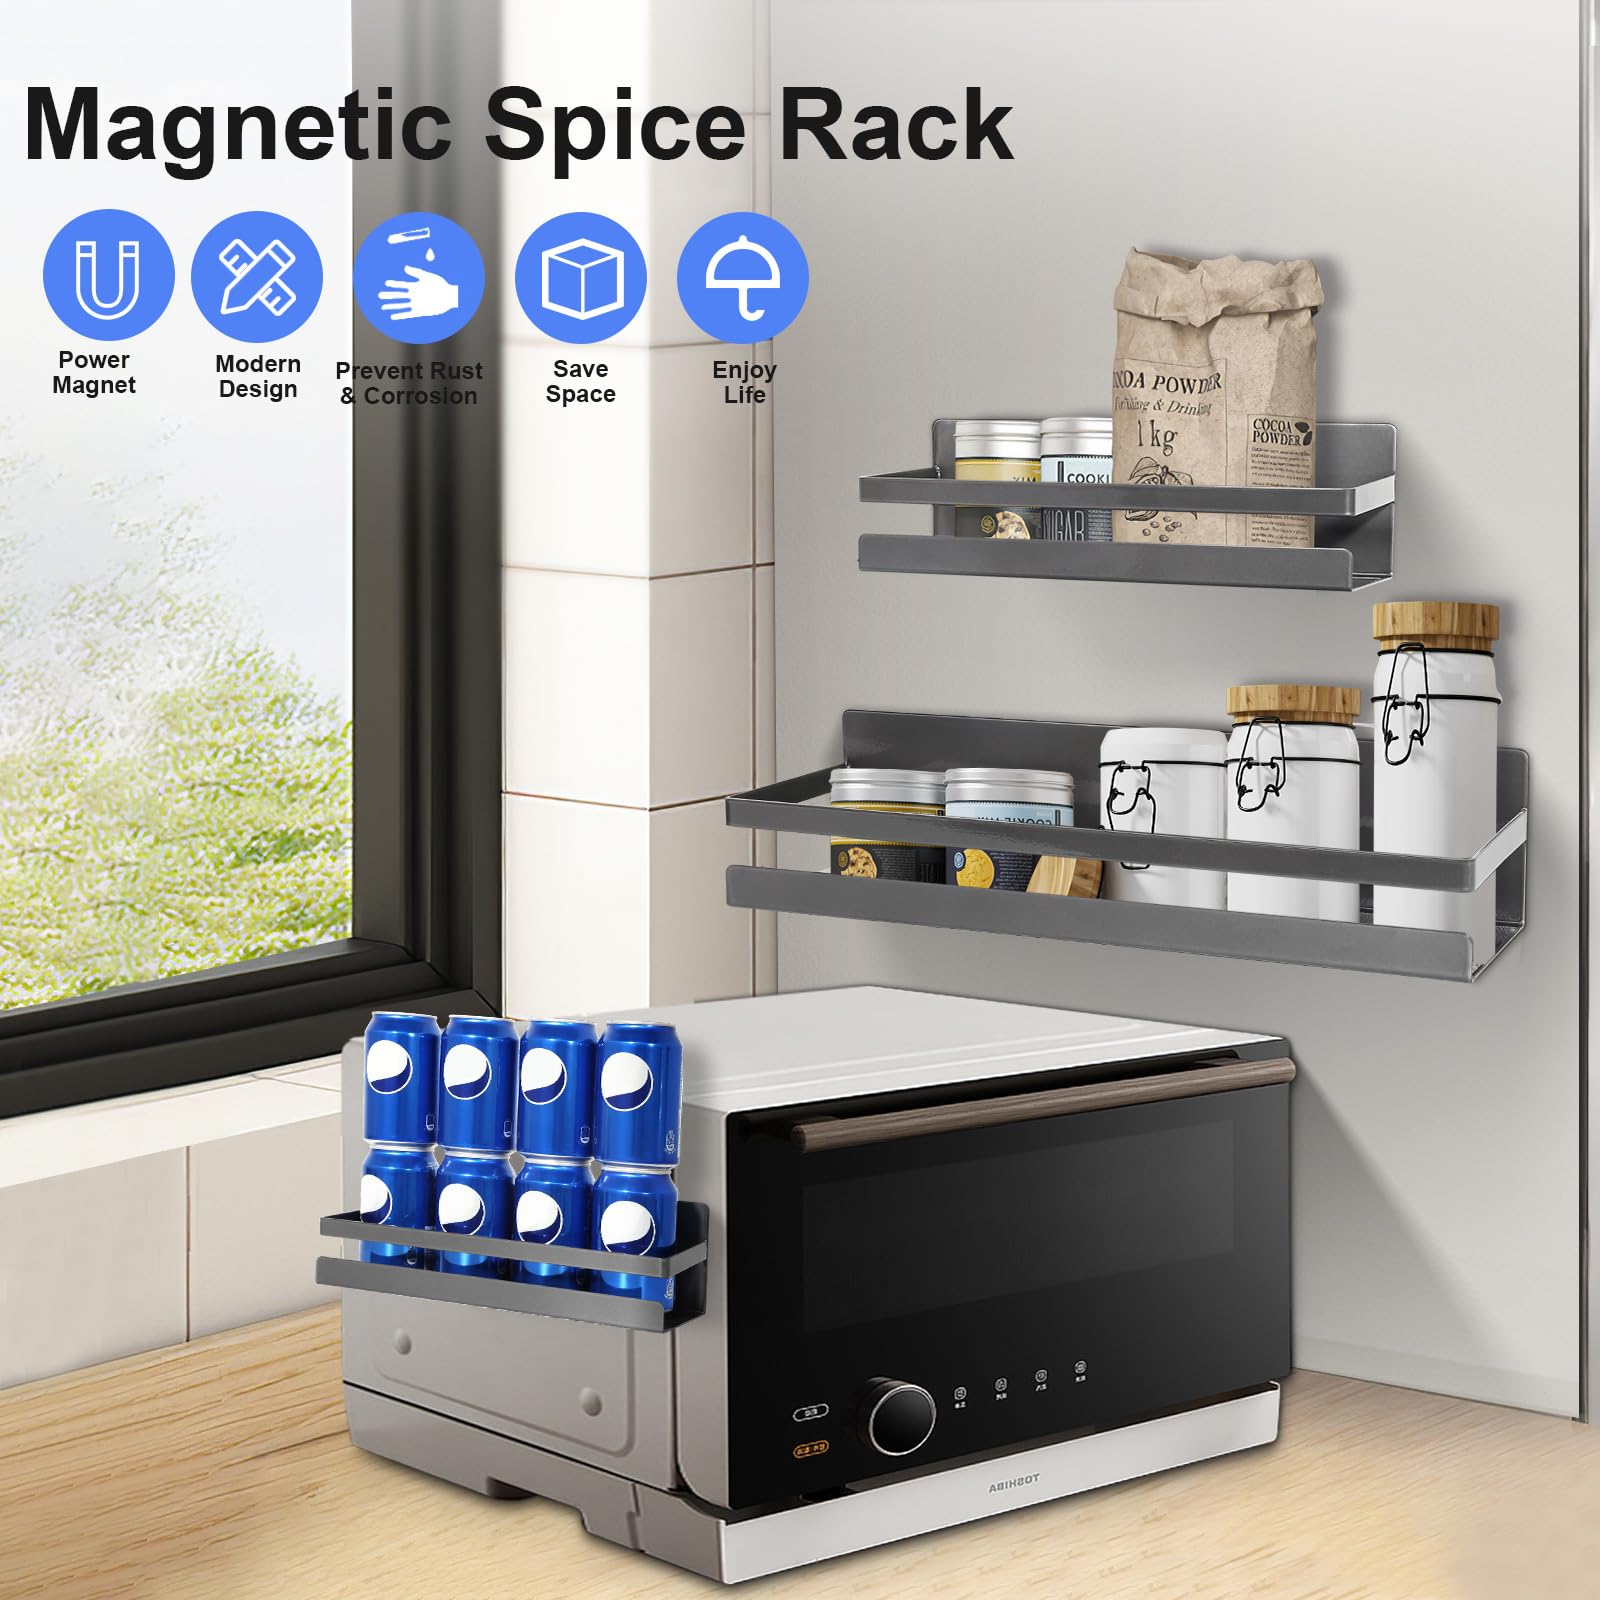 Uten Large Magnetic Spice Rack for Refrigerator, 2 Pack Strong Magnetic Shelves, Magnetic Shelf Moveable Fridge Organizer for Kitchen Holding Spices, Jars, Perfect Space Saver Storage Spice Rack